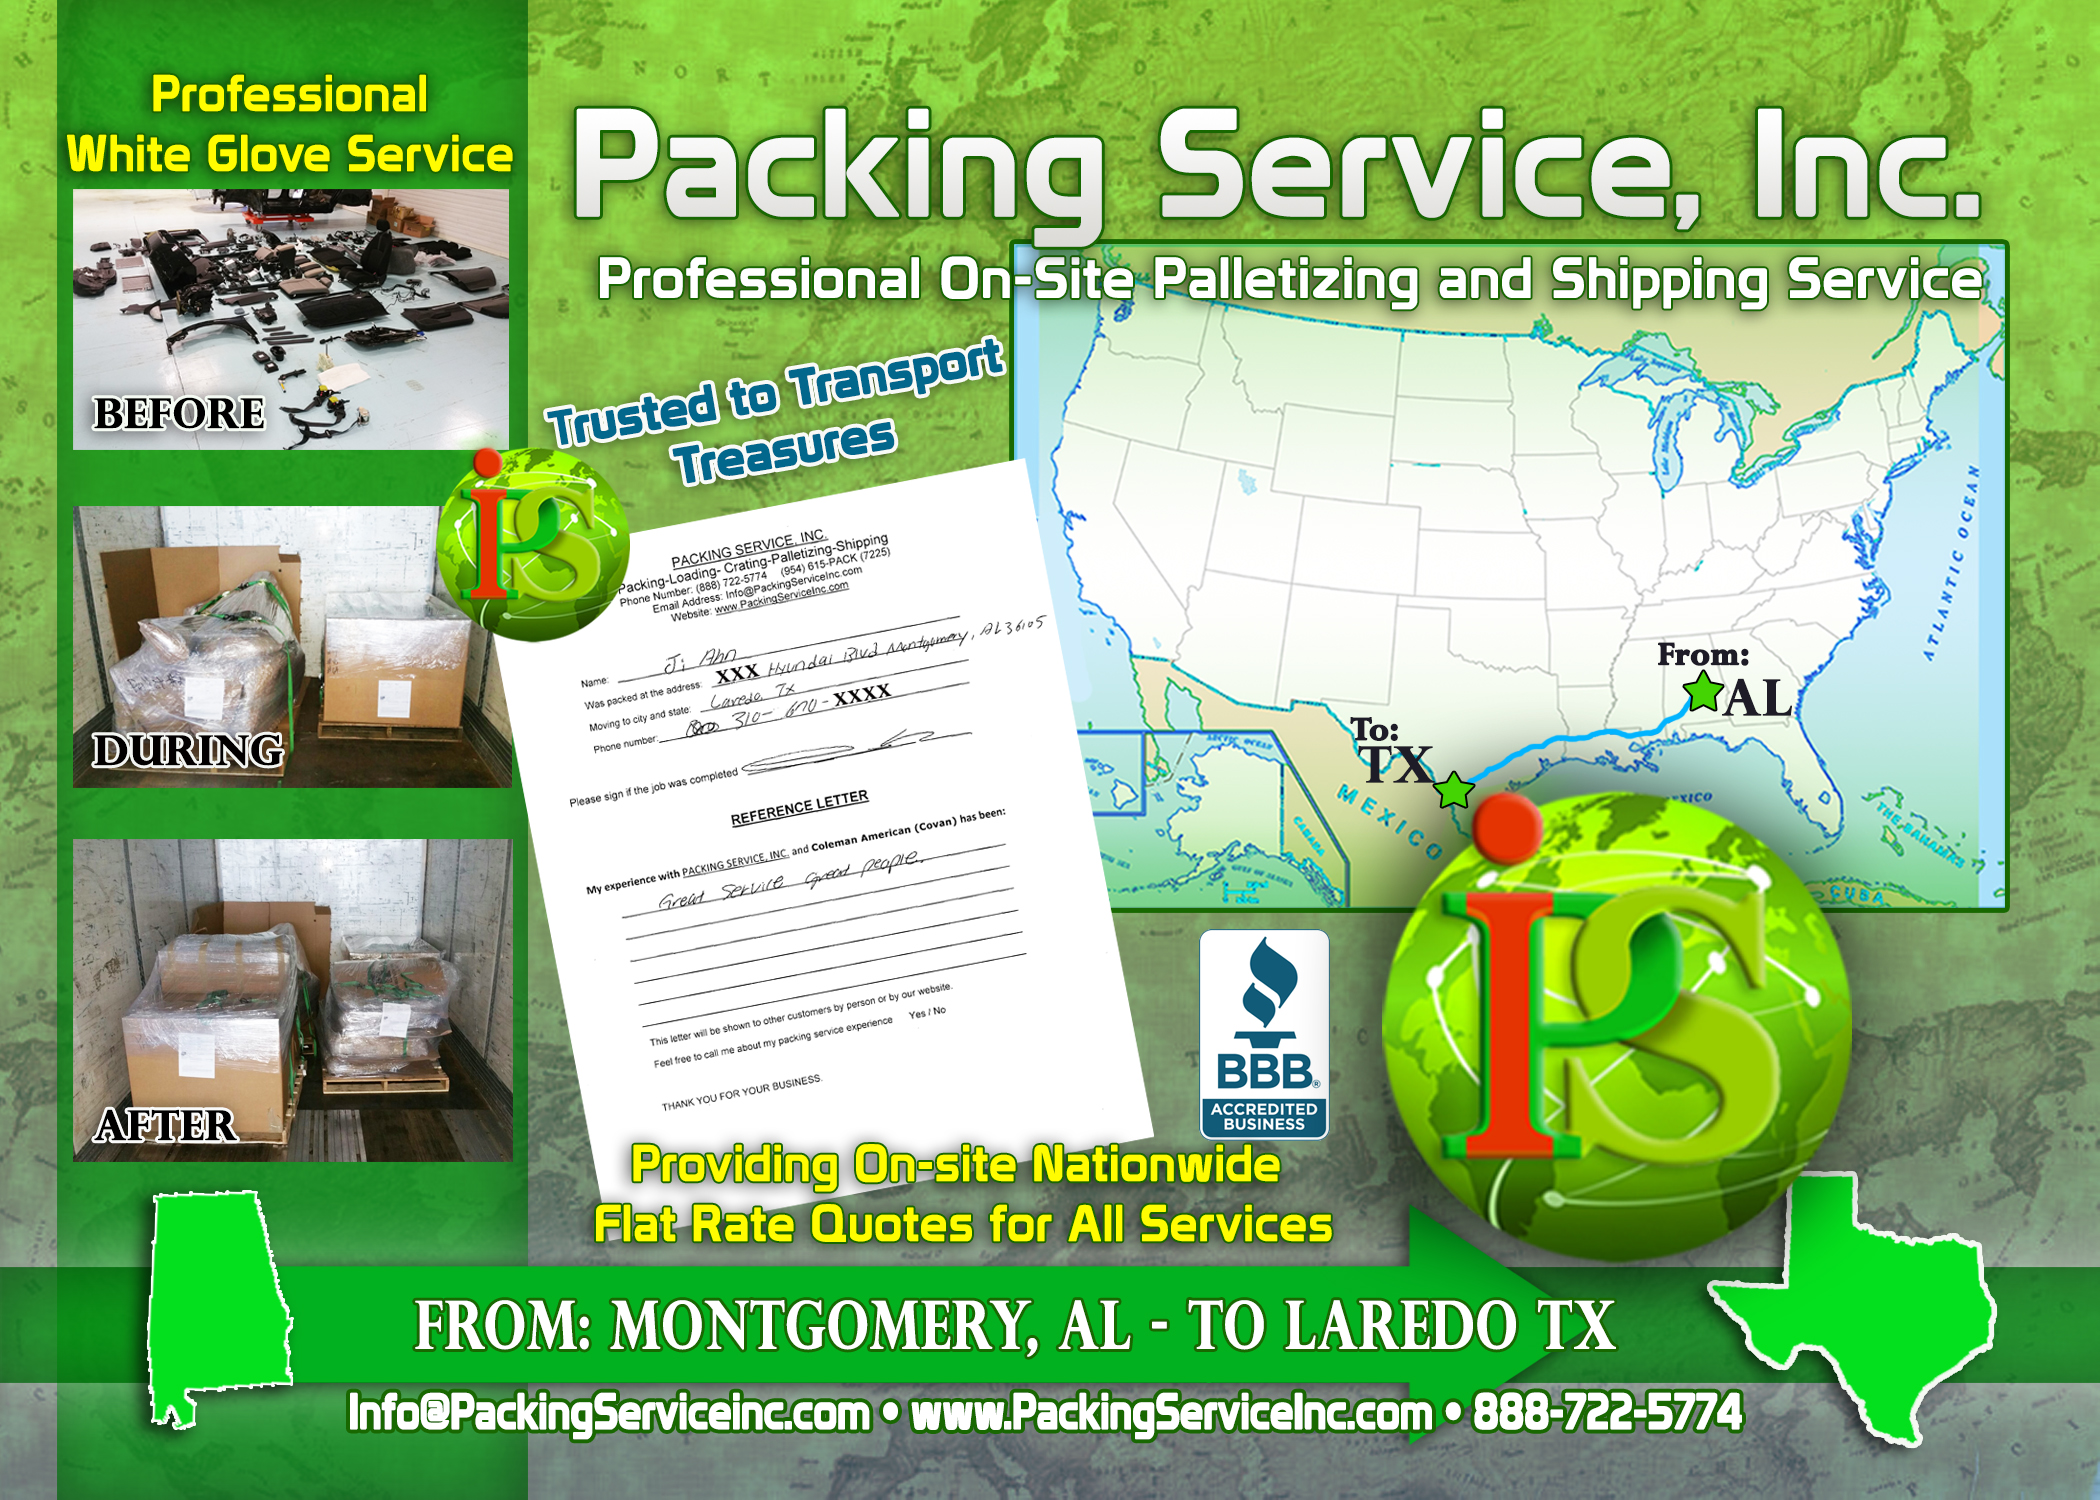 Wrapping and Packing Car Parts in Boxes, Palletizing and Shipping Services TX-AL with Packing Service, Inc. - 911